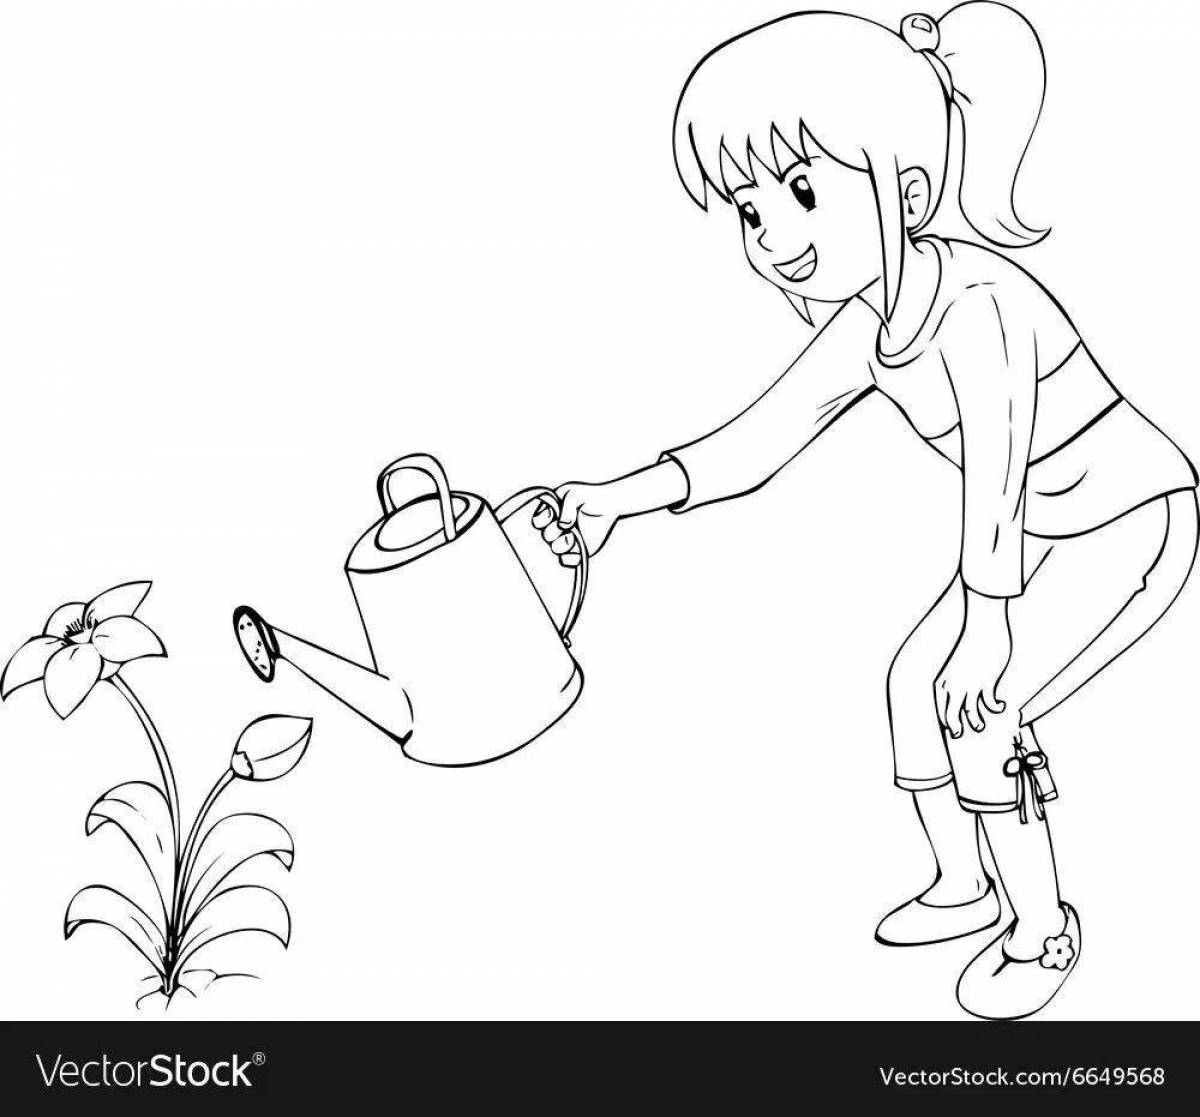 Exciting coloring page with pipe and jug